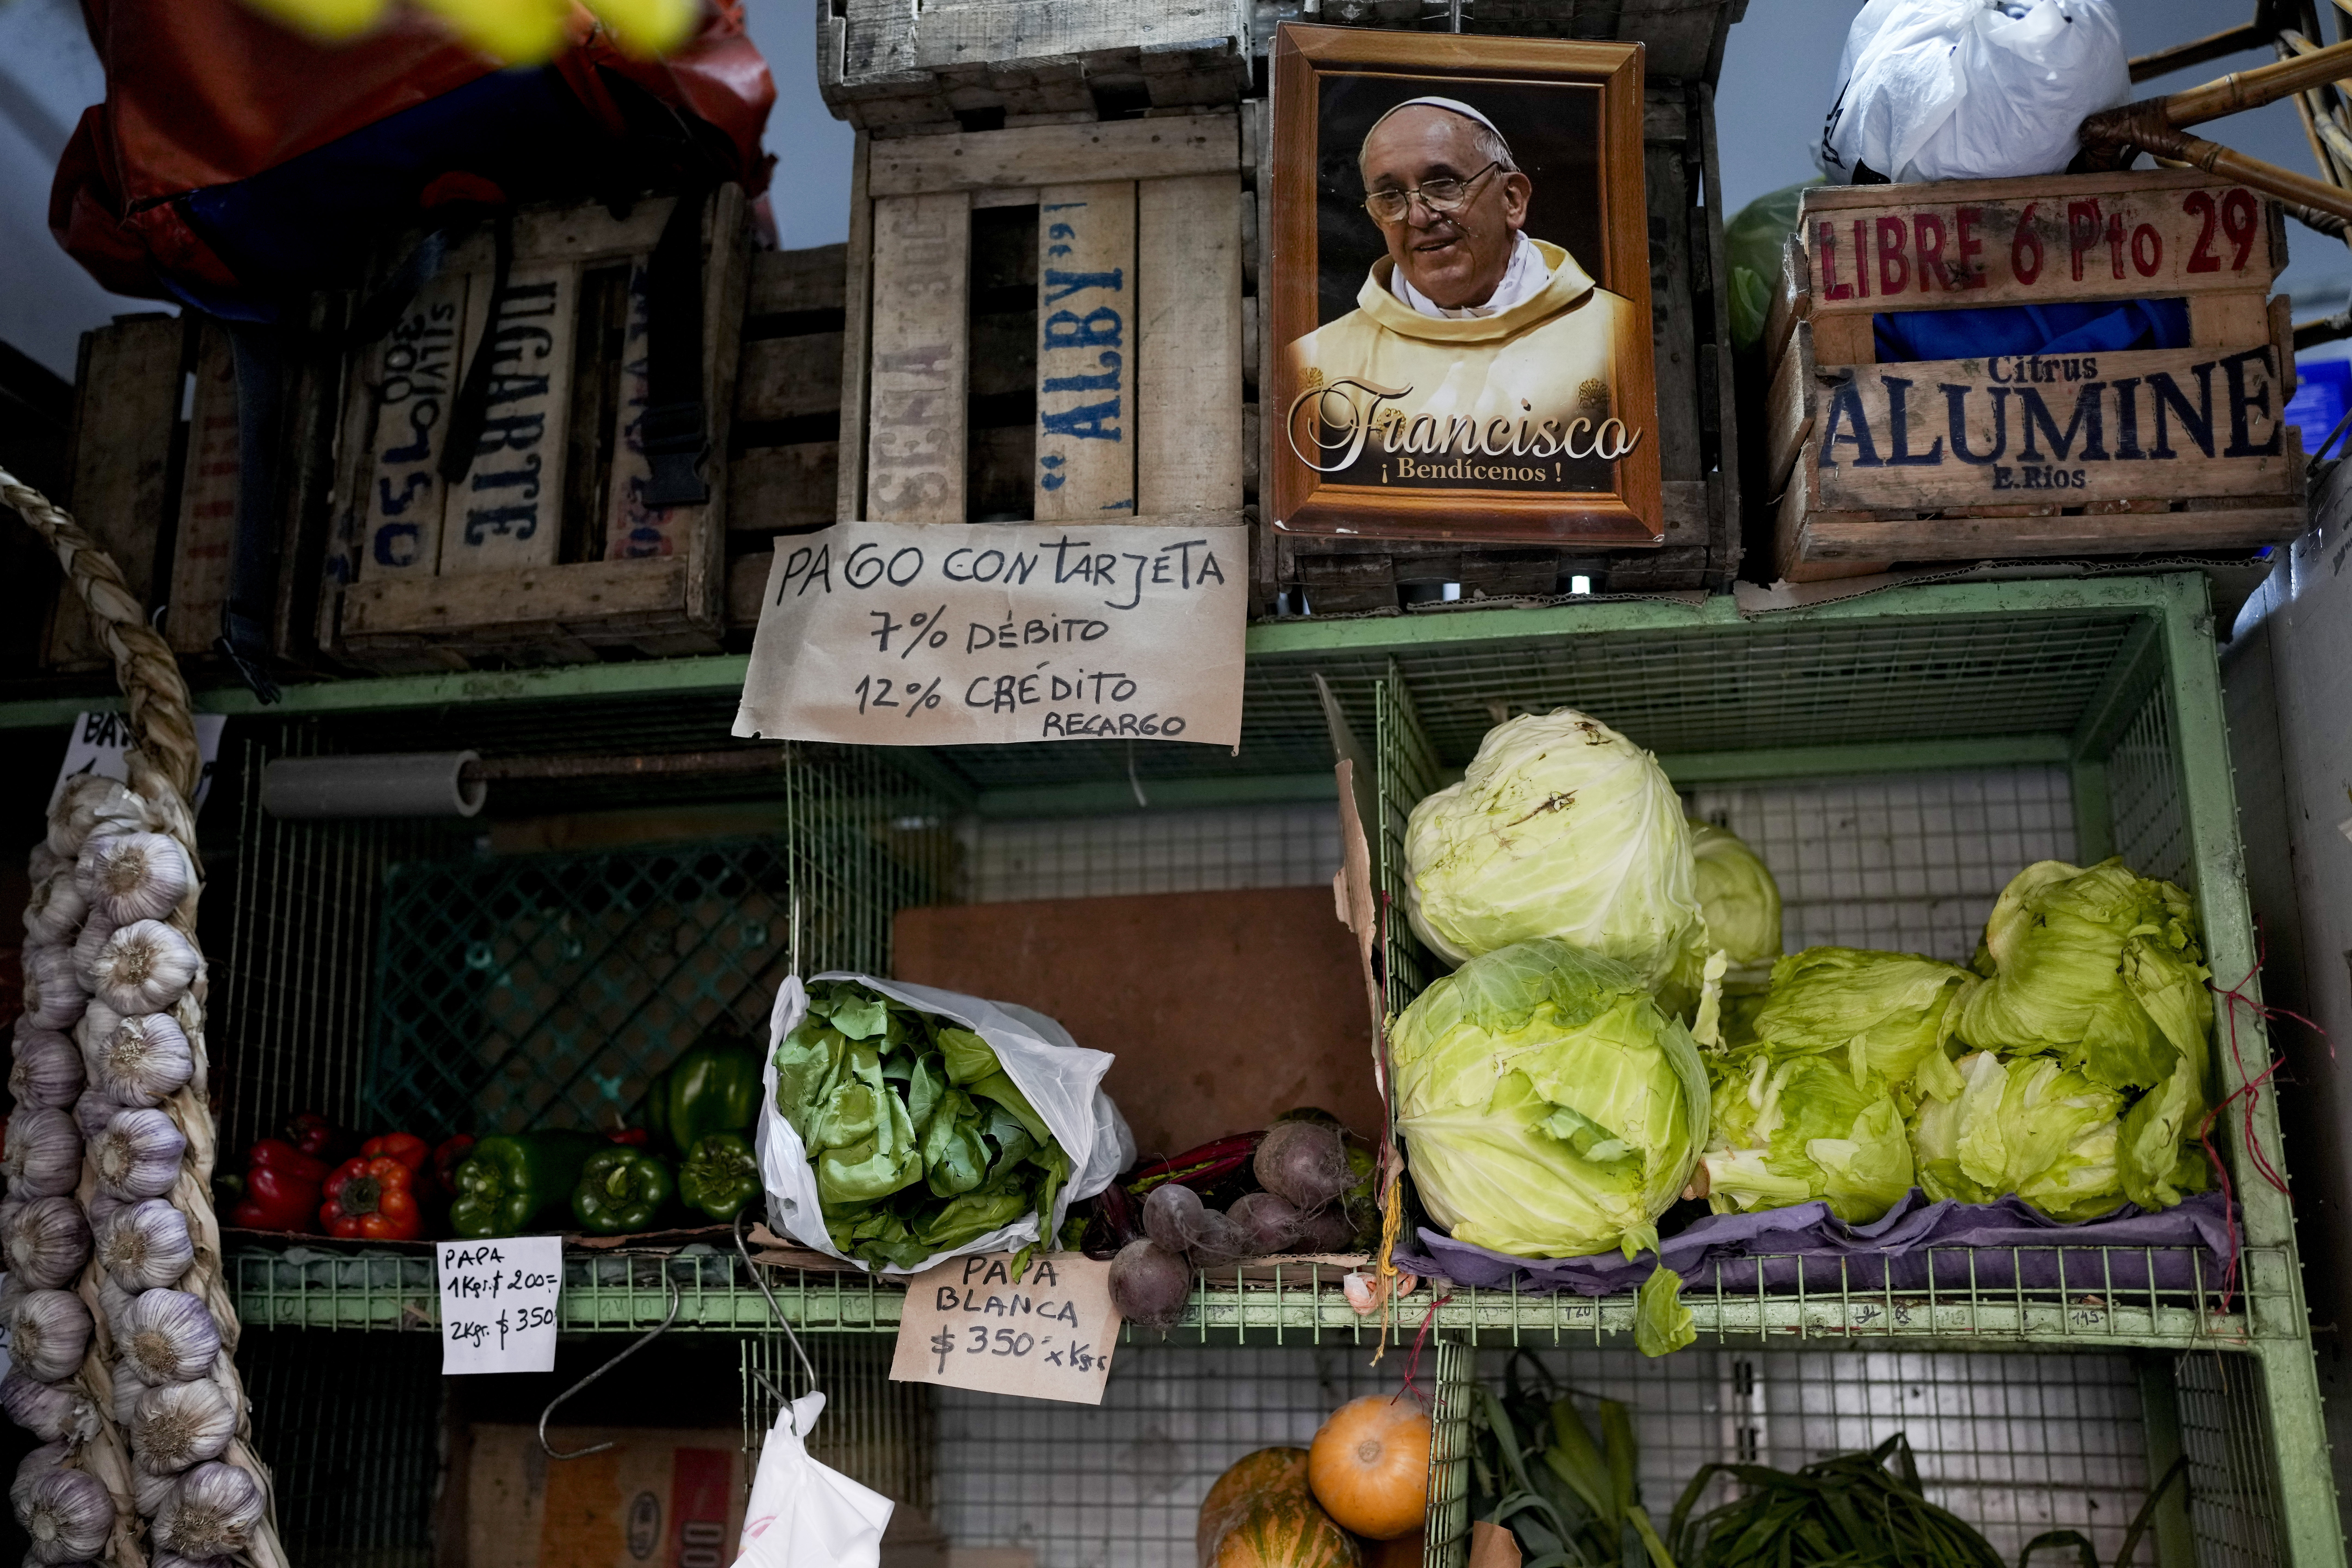 A photograph of Pope Francis hangs next to a sign informing that card payments increase 7% for debit, and 12% for credit, at a fruit and vegetable stall in a market in Buenos Aires, Argentina, May 11, 2023. According to a recent report on food security from the World Bank, the price of food in Argentina suffers year-on-year inflation of 107%.  (AP Photo/Natacha Pisarenko)